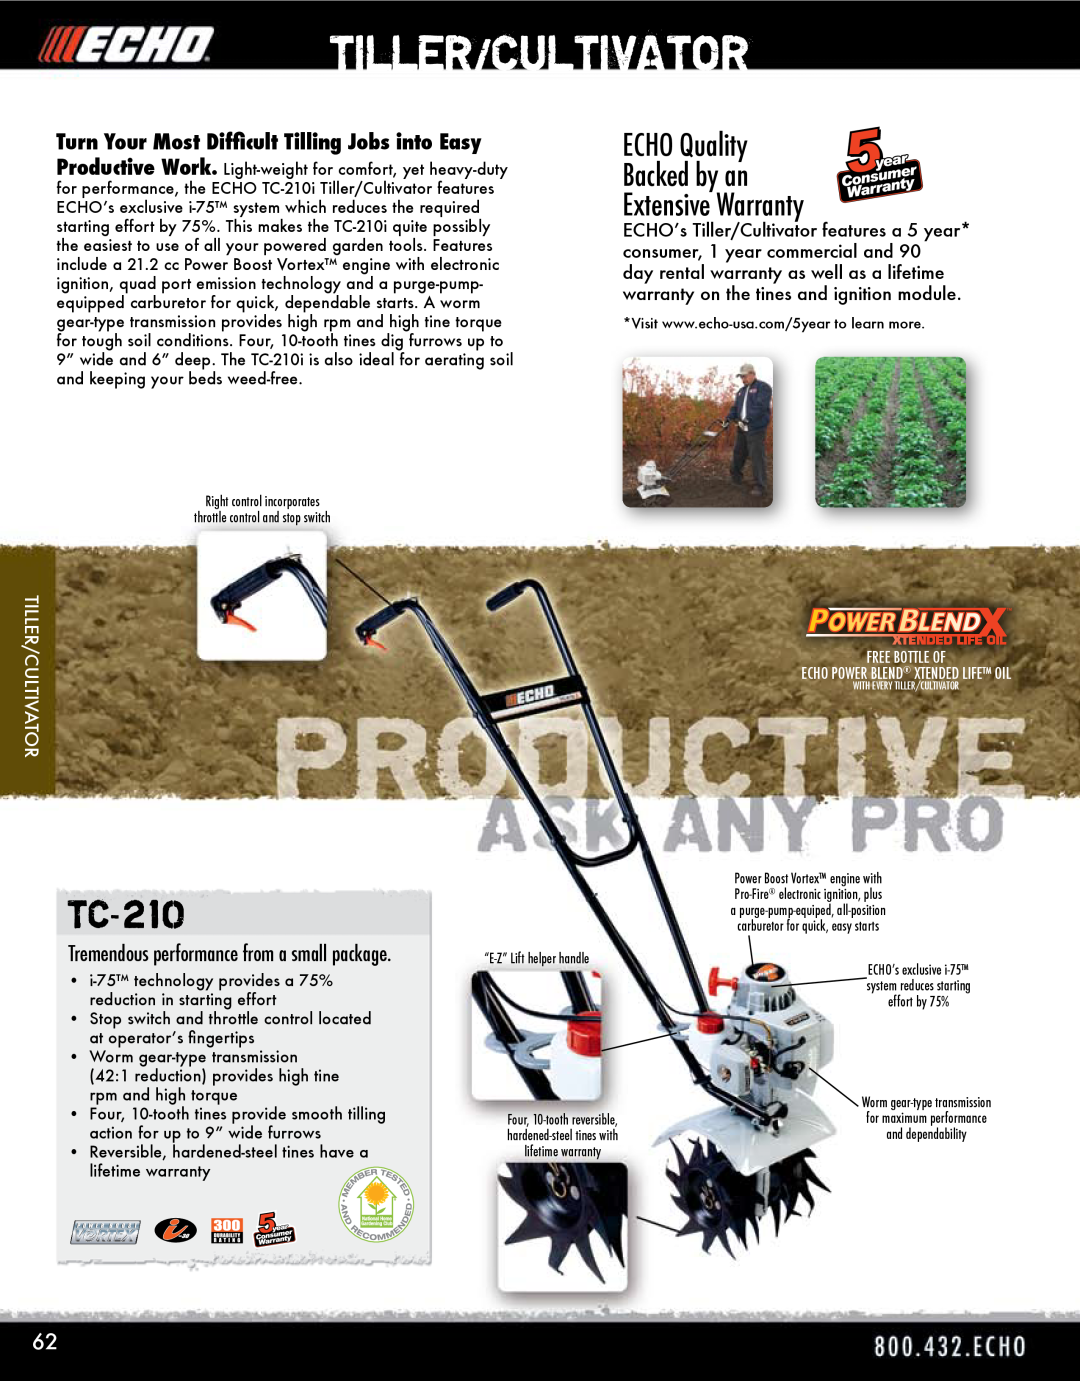 Echo HV-110XG manual Tiller/Cultivator, TC-210, Turn Your Most Difficult Tilling Jobs into Easy 